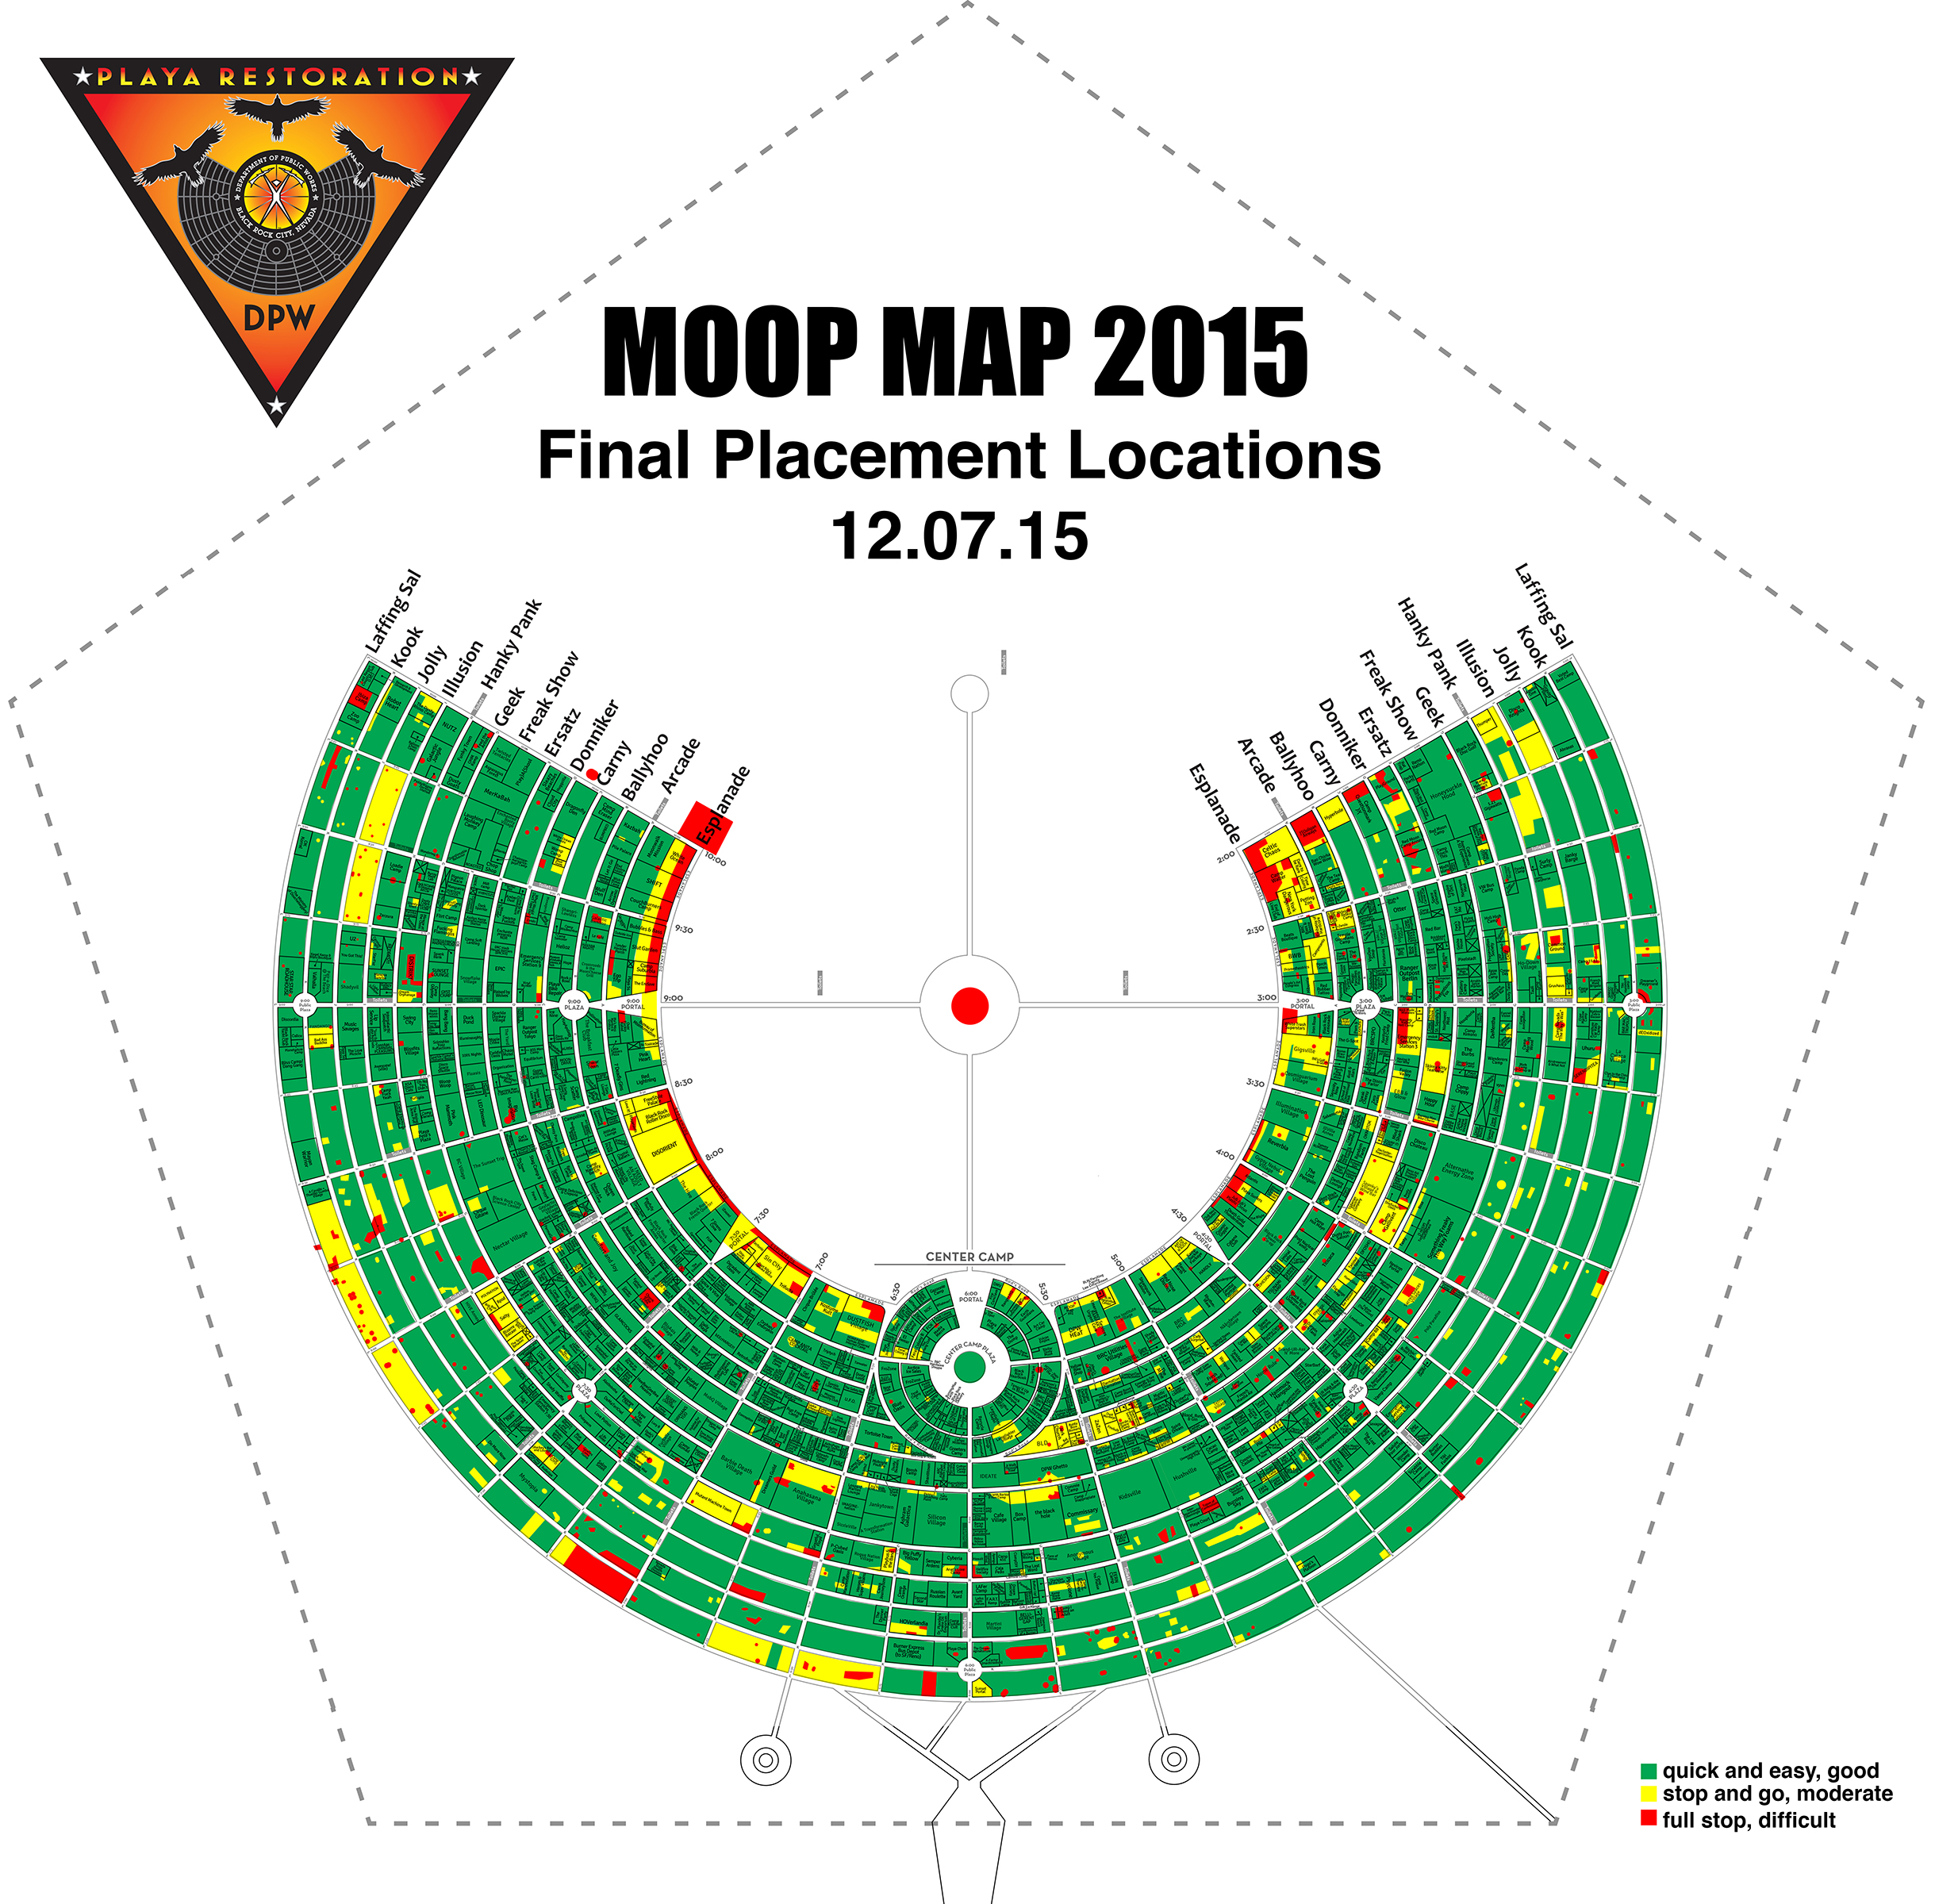 Moop Map 2015: Note the red and yellow ring around Esplanade. :(